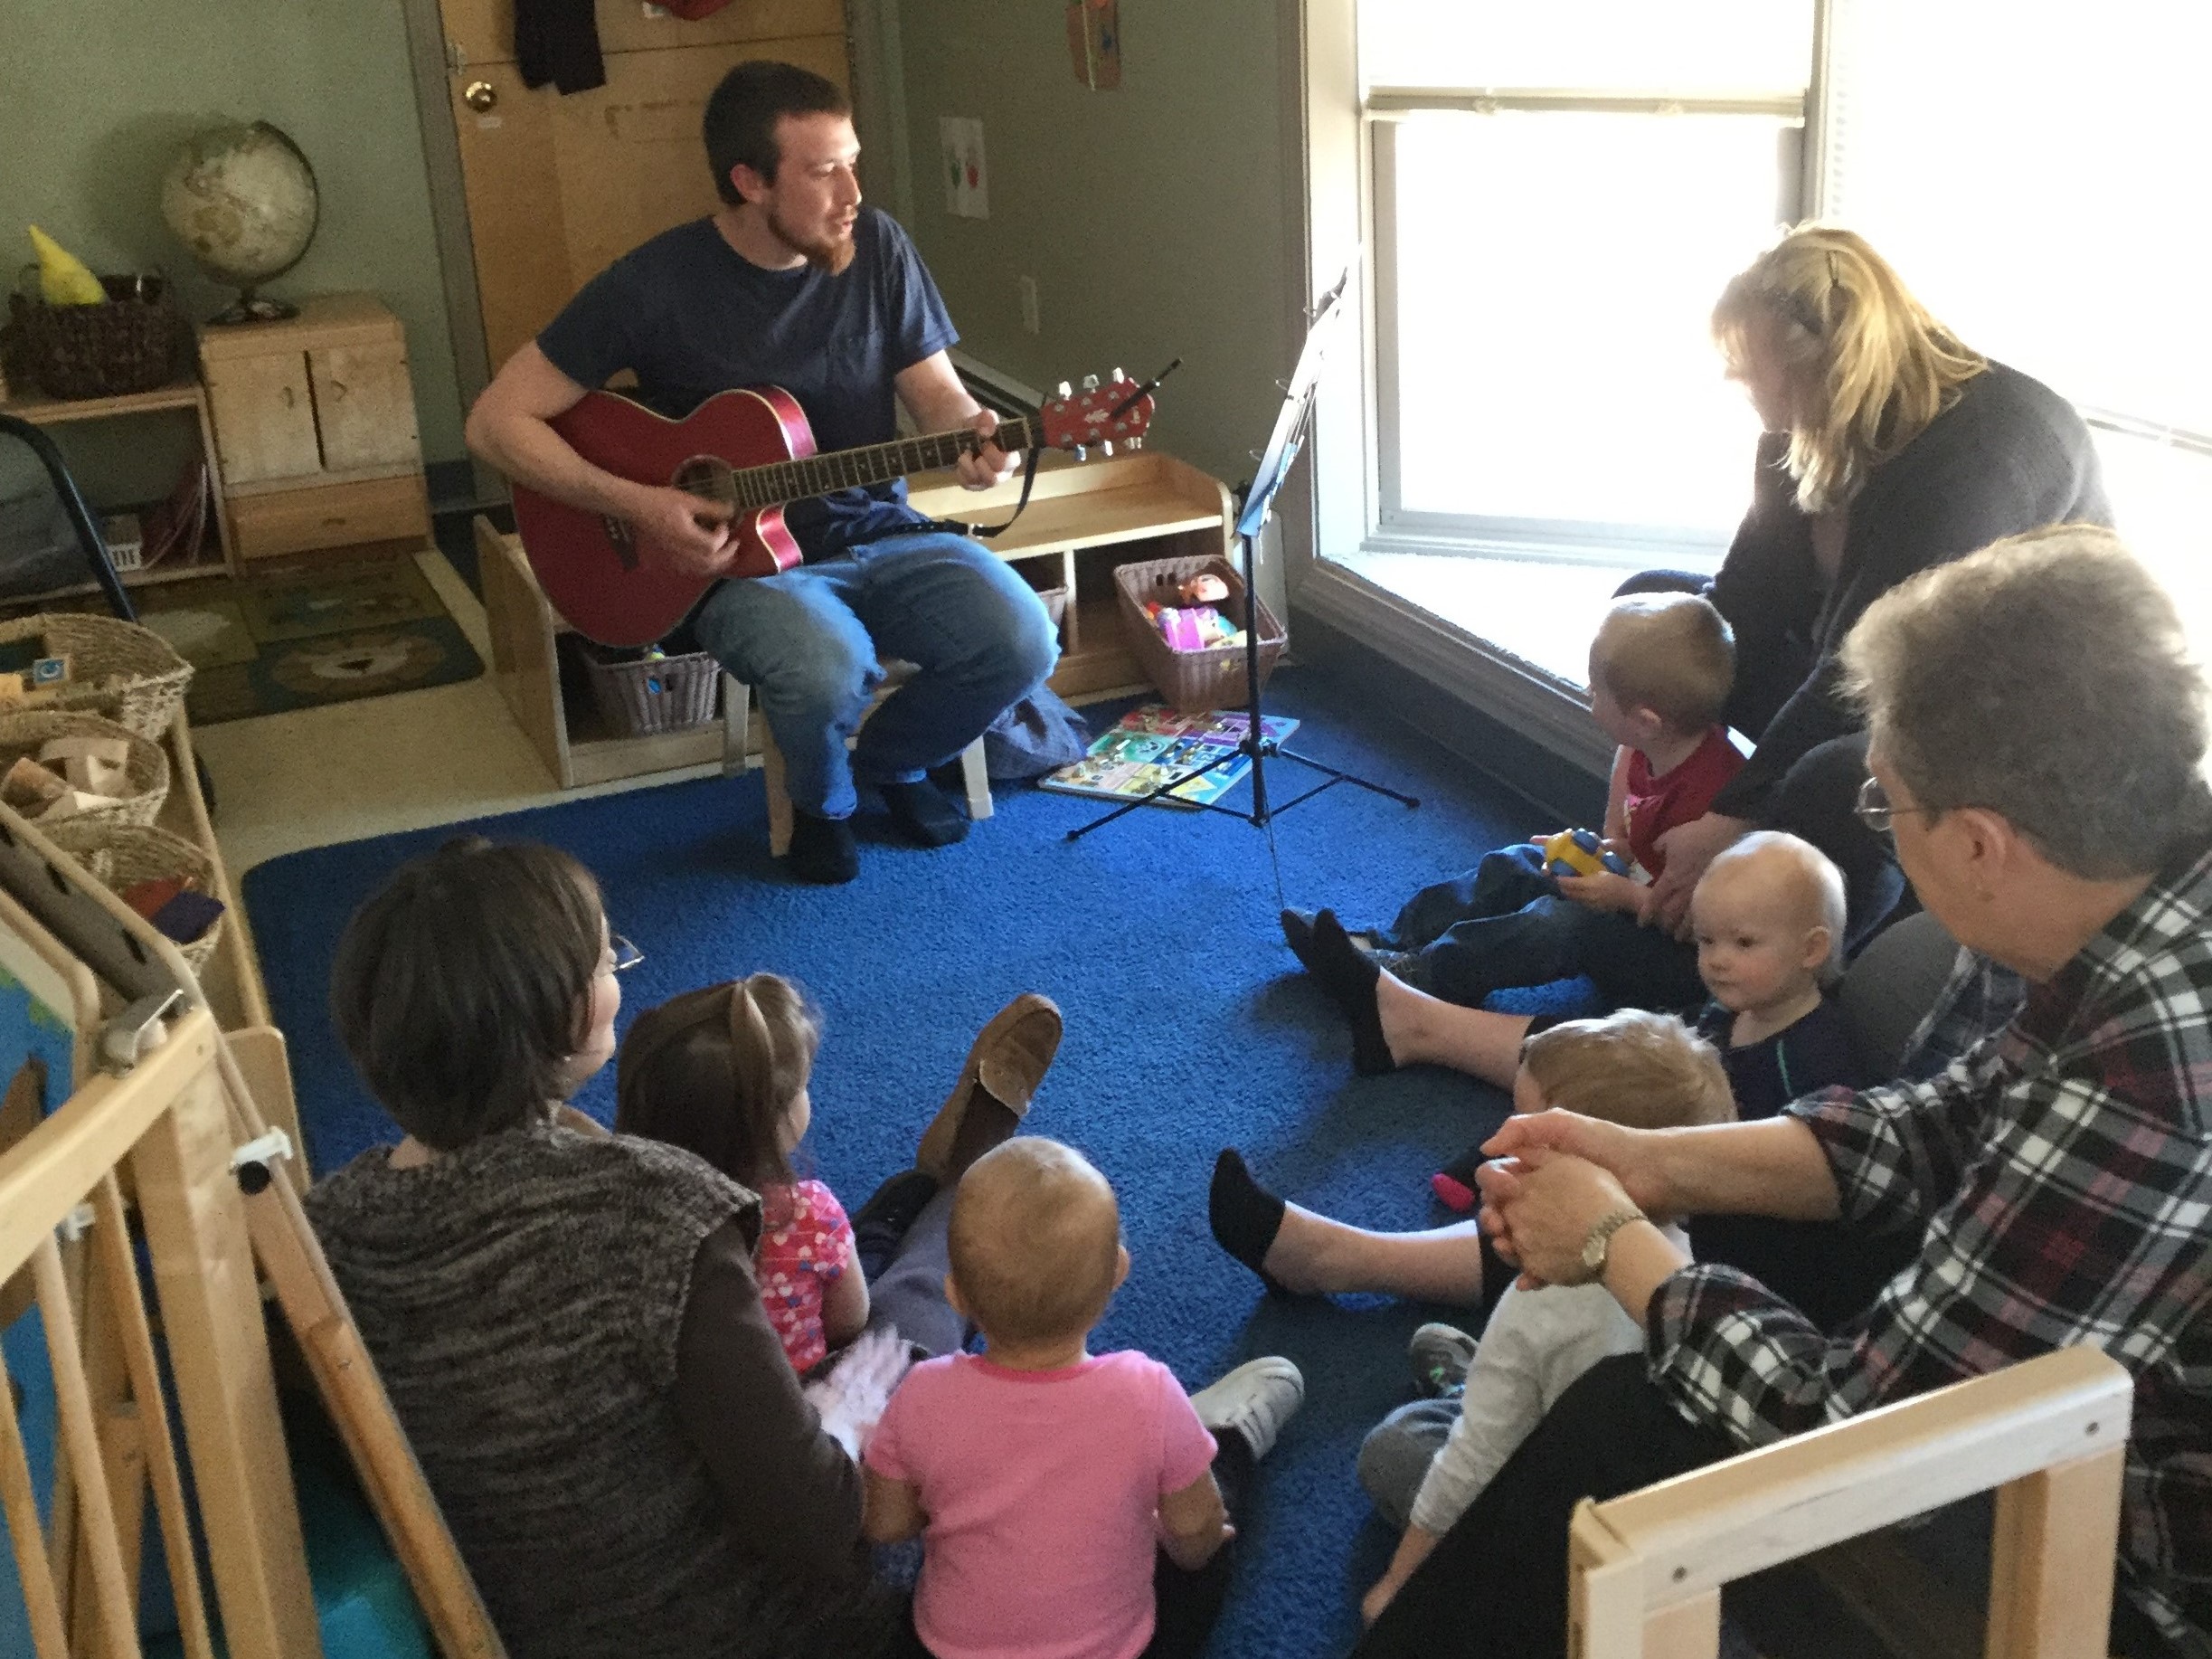 Man playing guitar with families sitting around